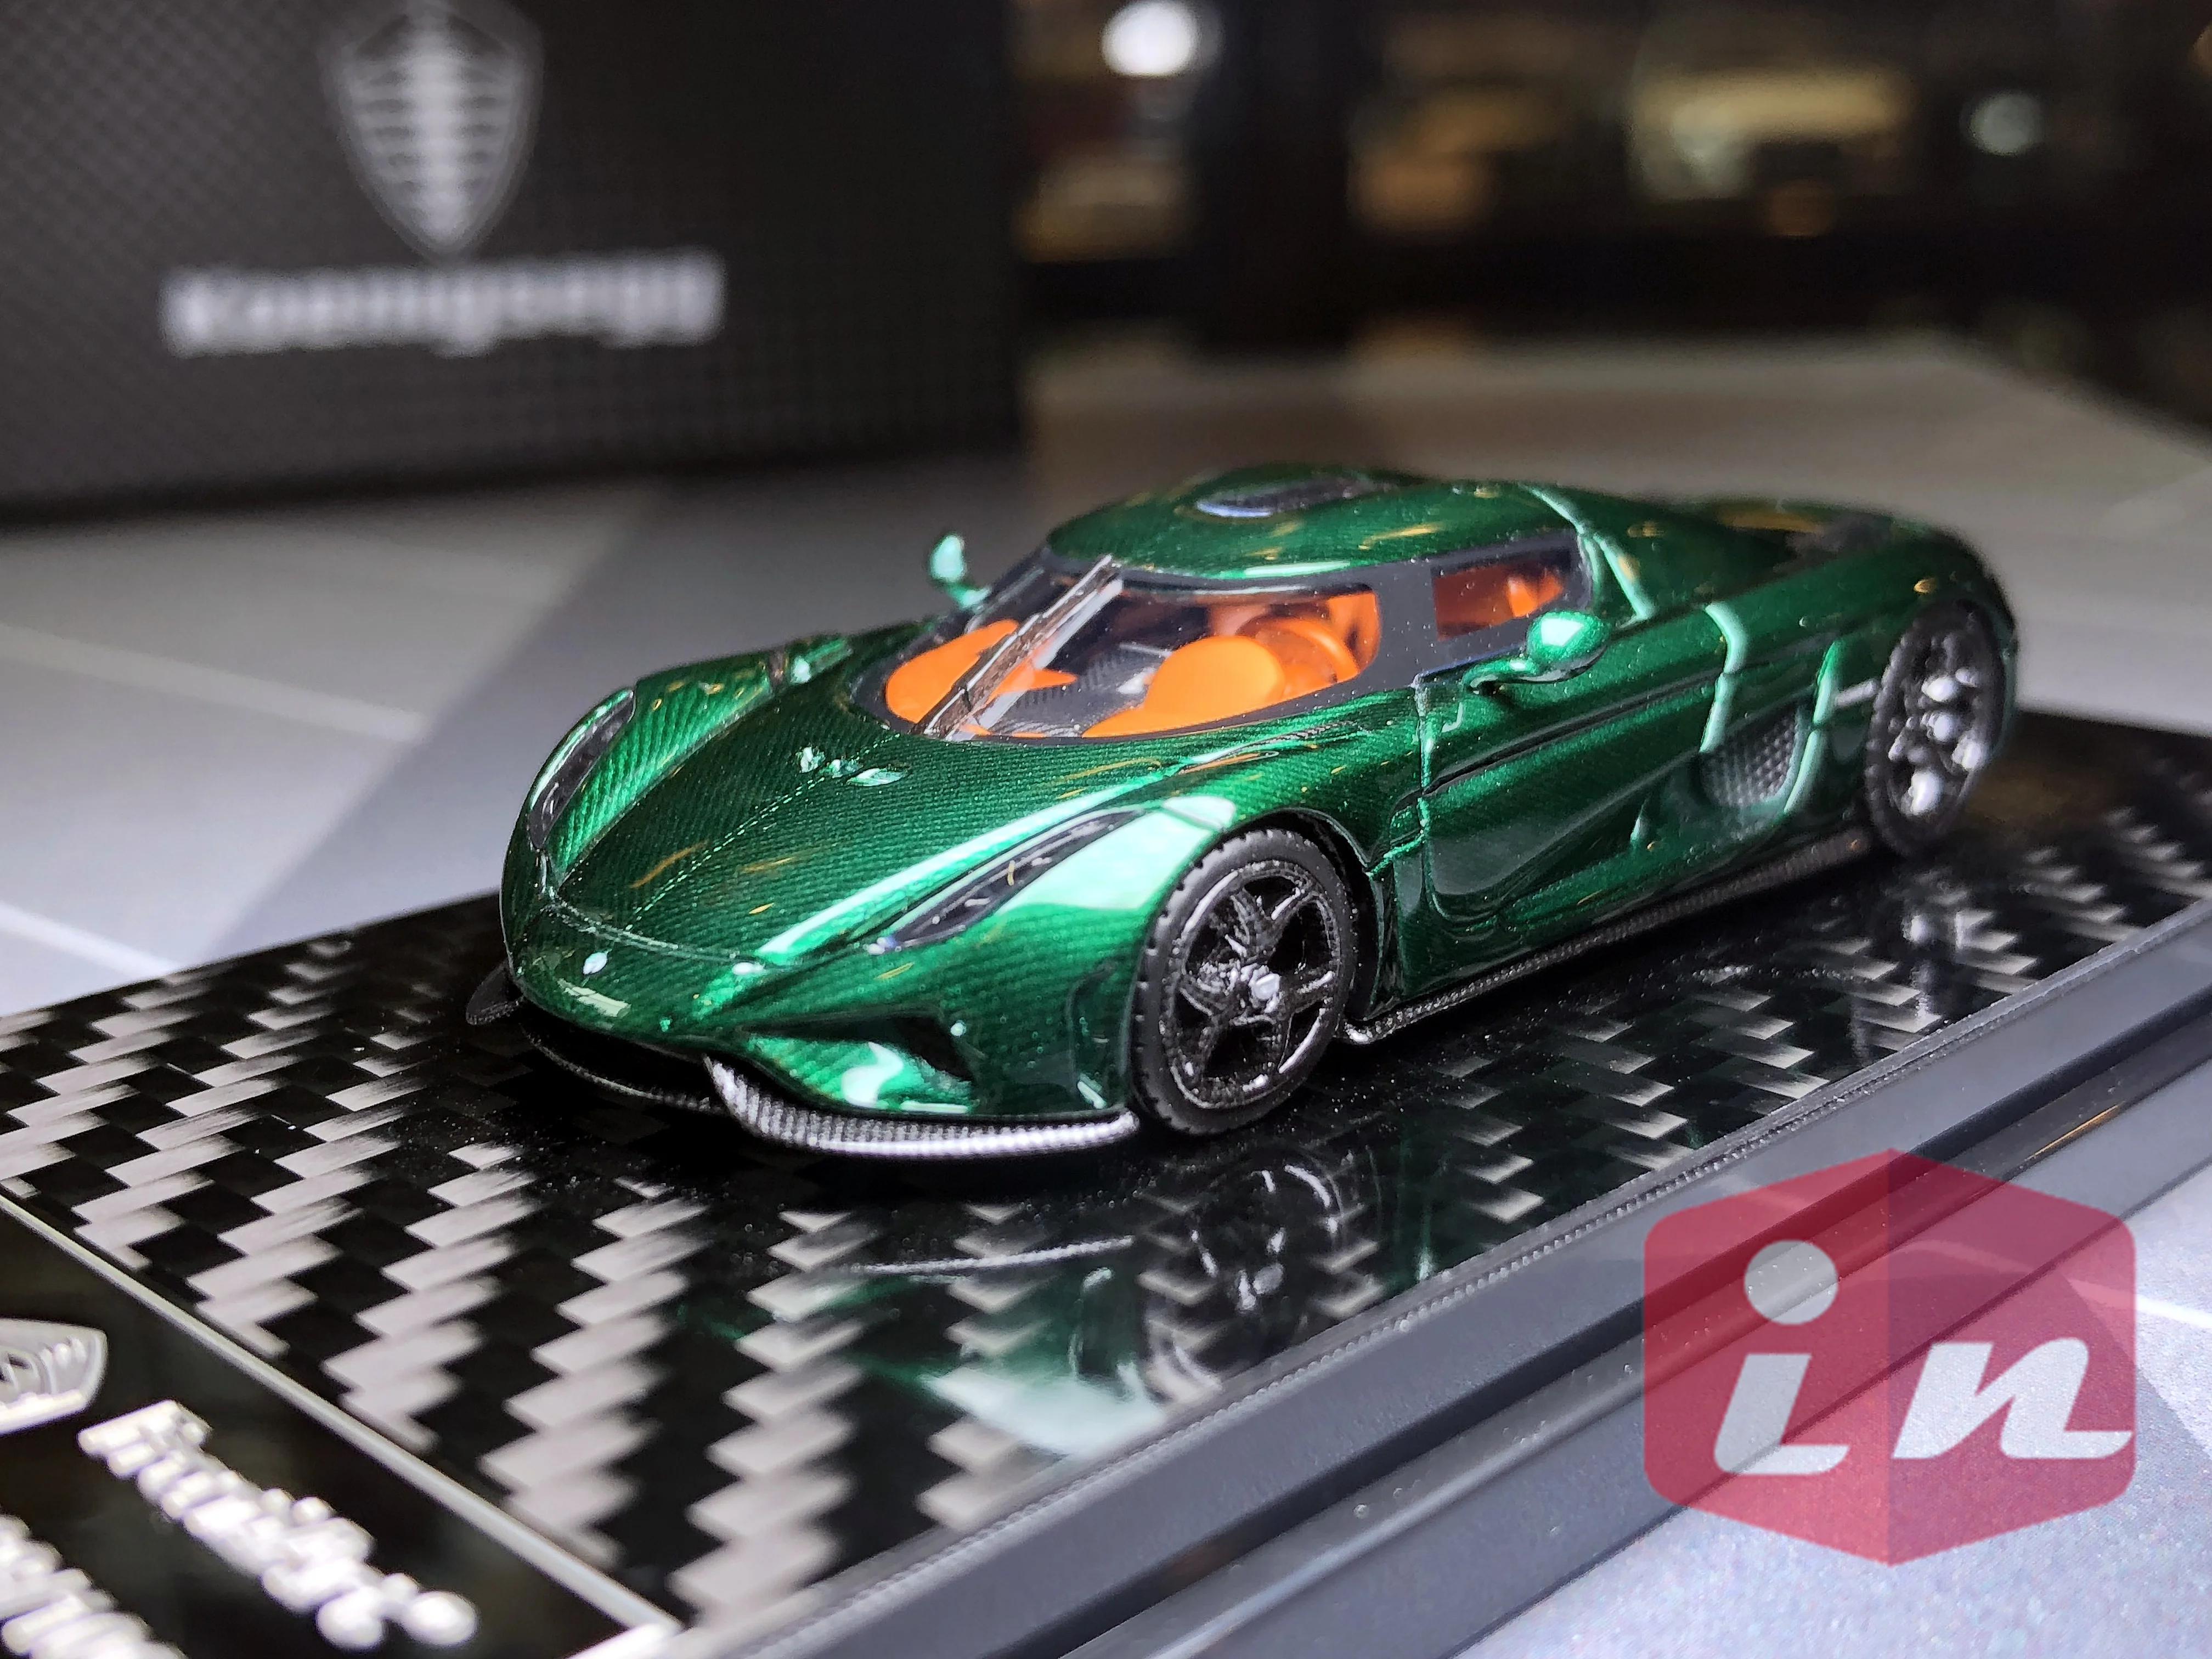 

Frontiart 1/64 Regera Grenn Carbon FA 1/64 Resin Model Car Collection Limited Edition Hobby Toy Car